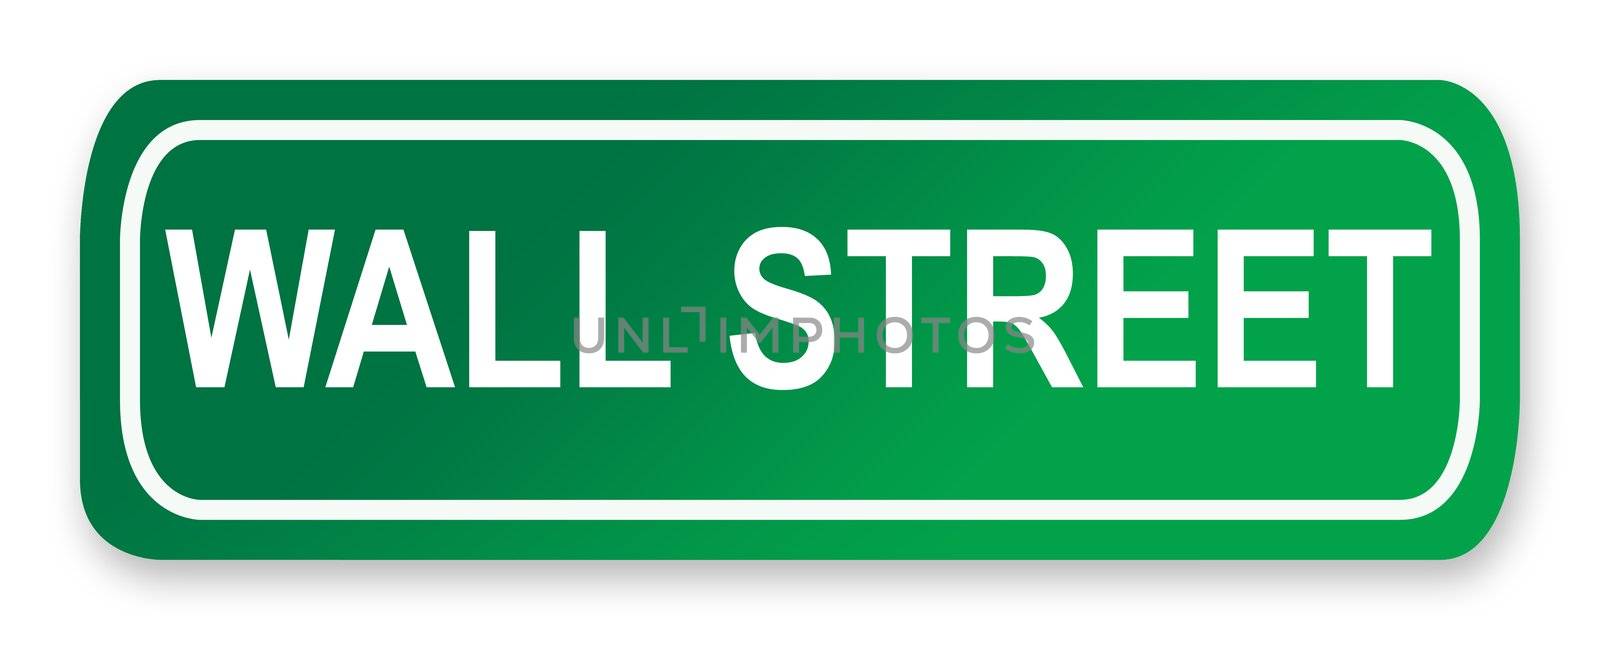 Wall Street road sign in green, New York City, America.